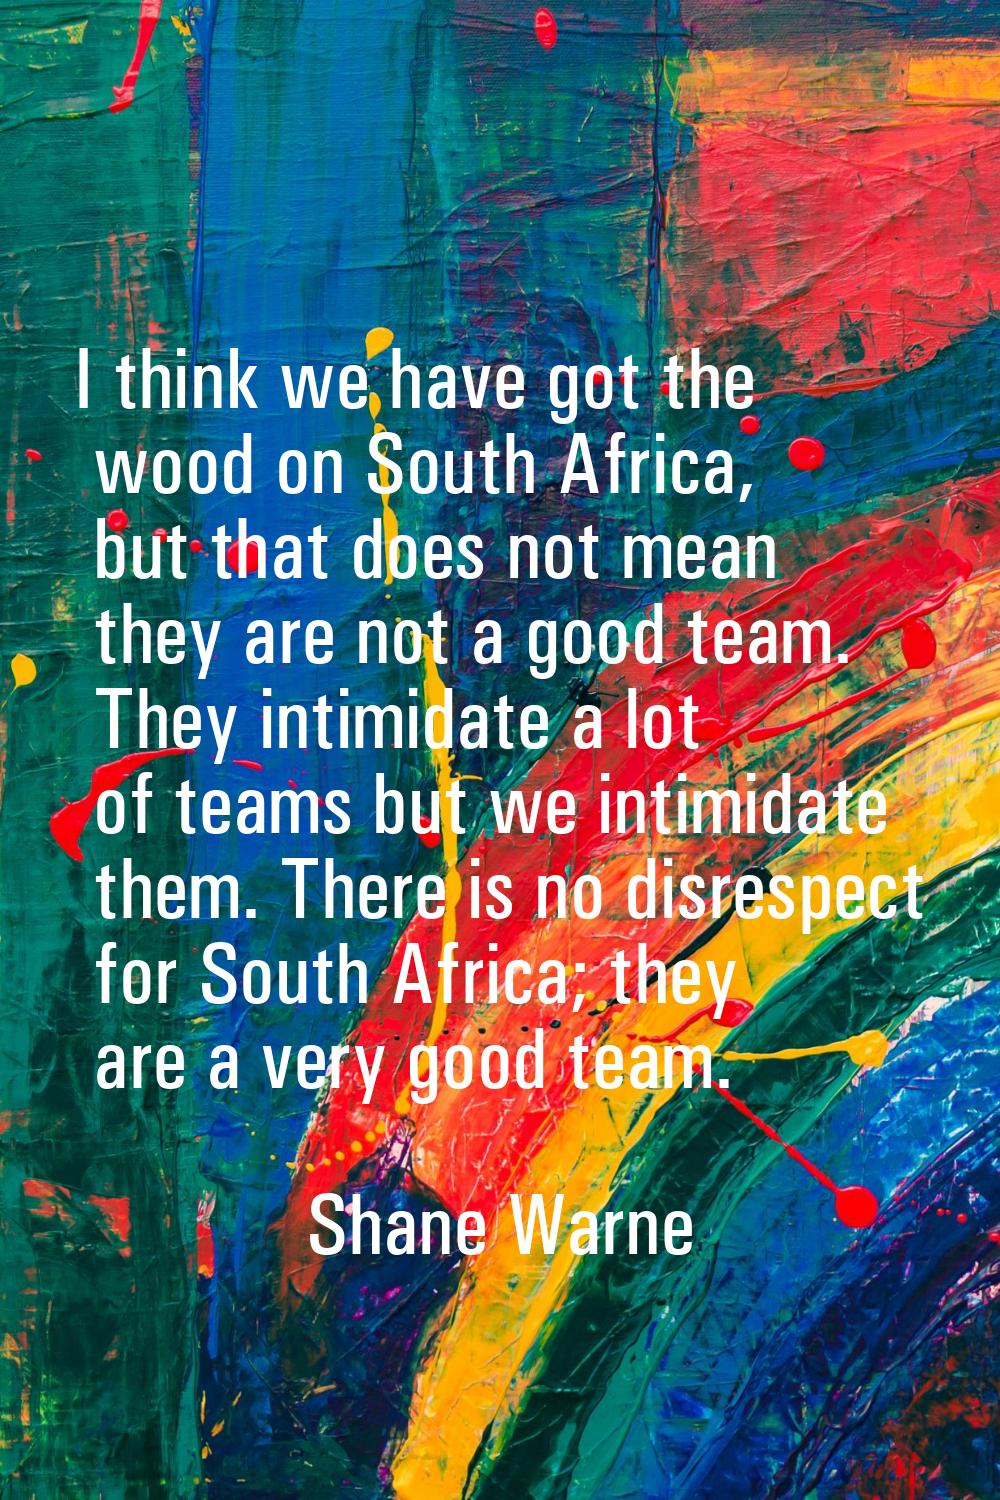 I think we have got the wood on South Africa, but that does not mean they are not a good team. They